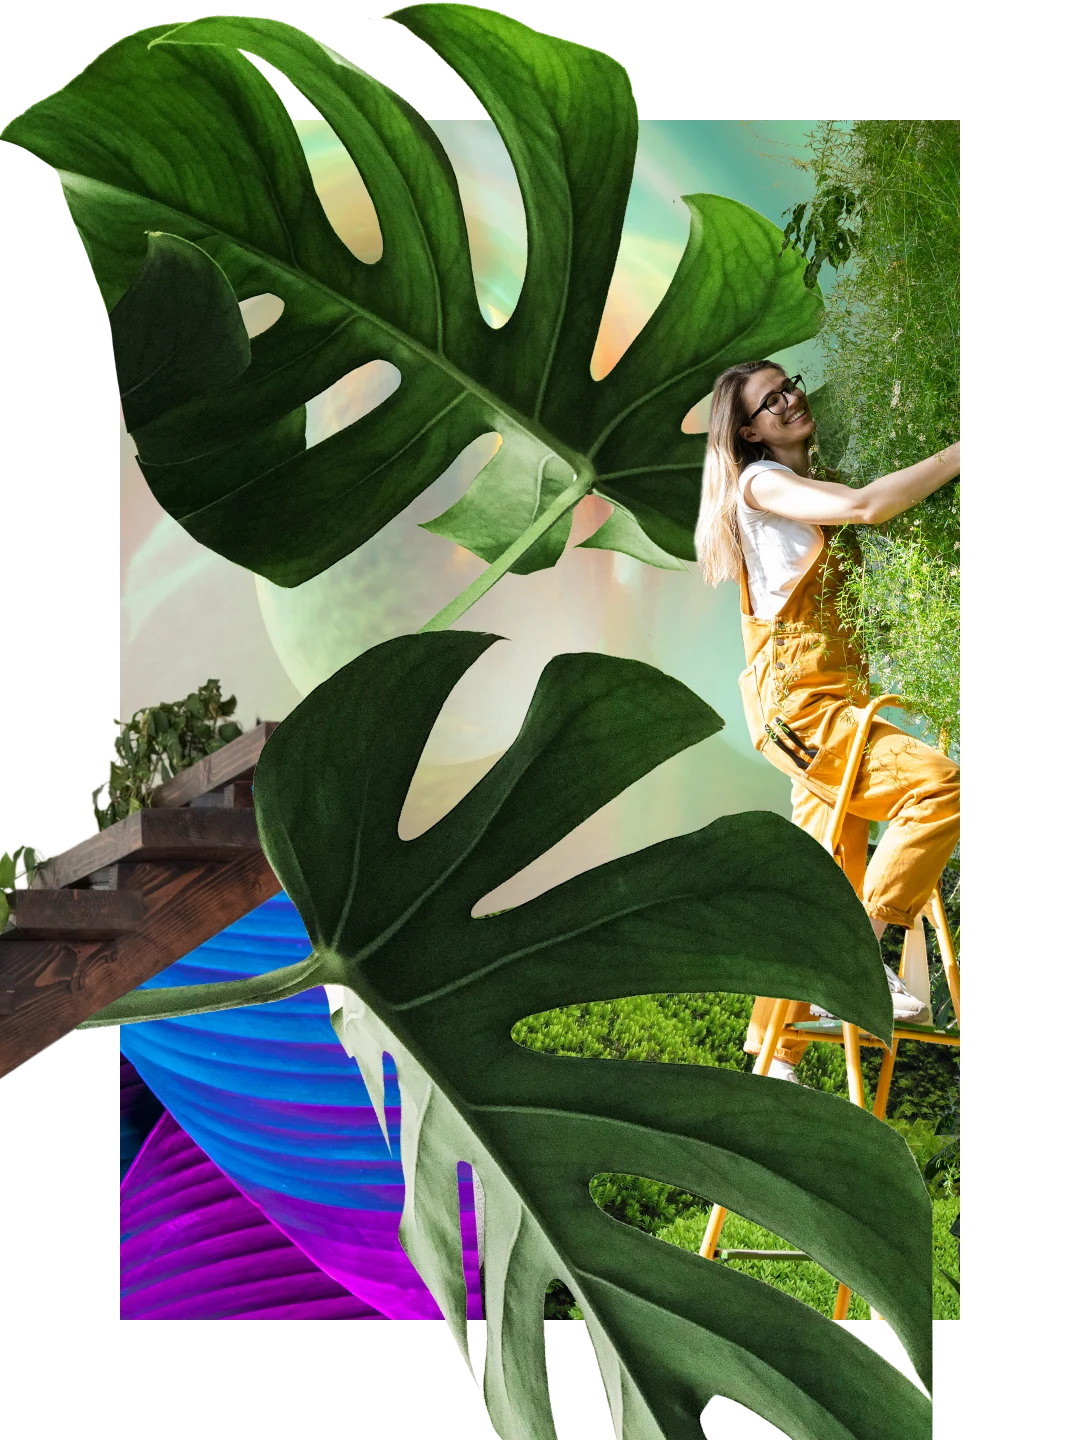 Collage of greenery. Two big monstera leaves. Staircase with leaves in back. White woman in yellow overalls on a ladder caring for a plant.
